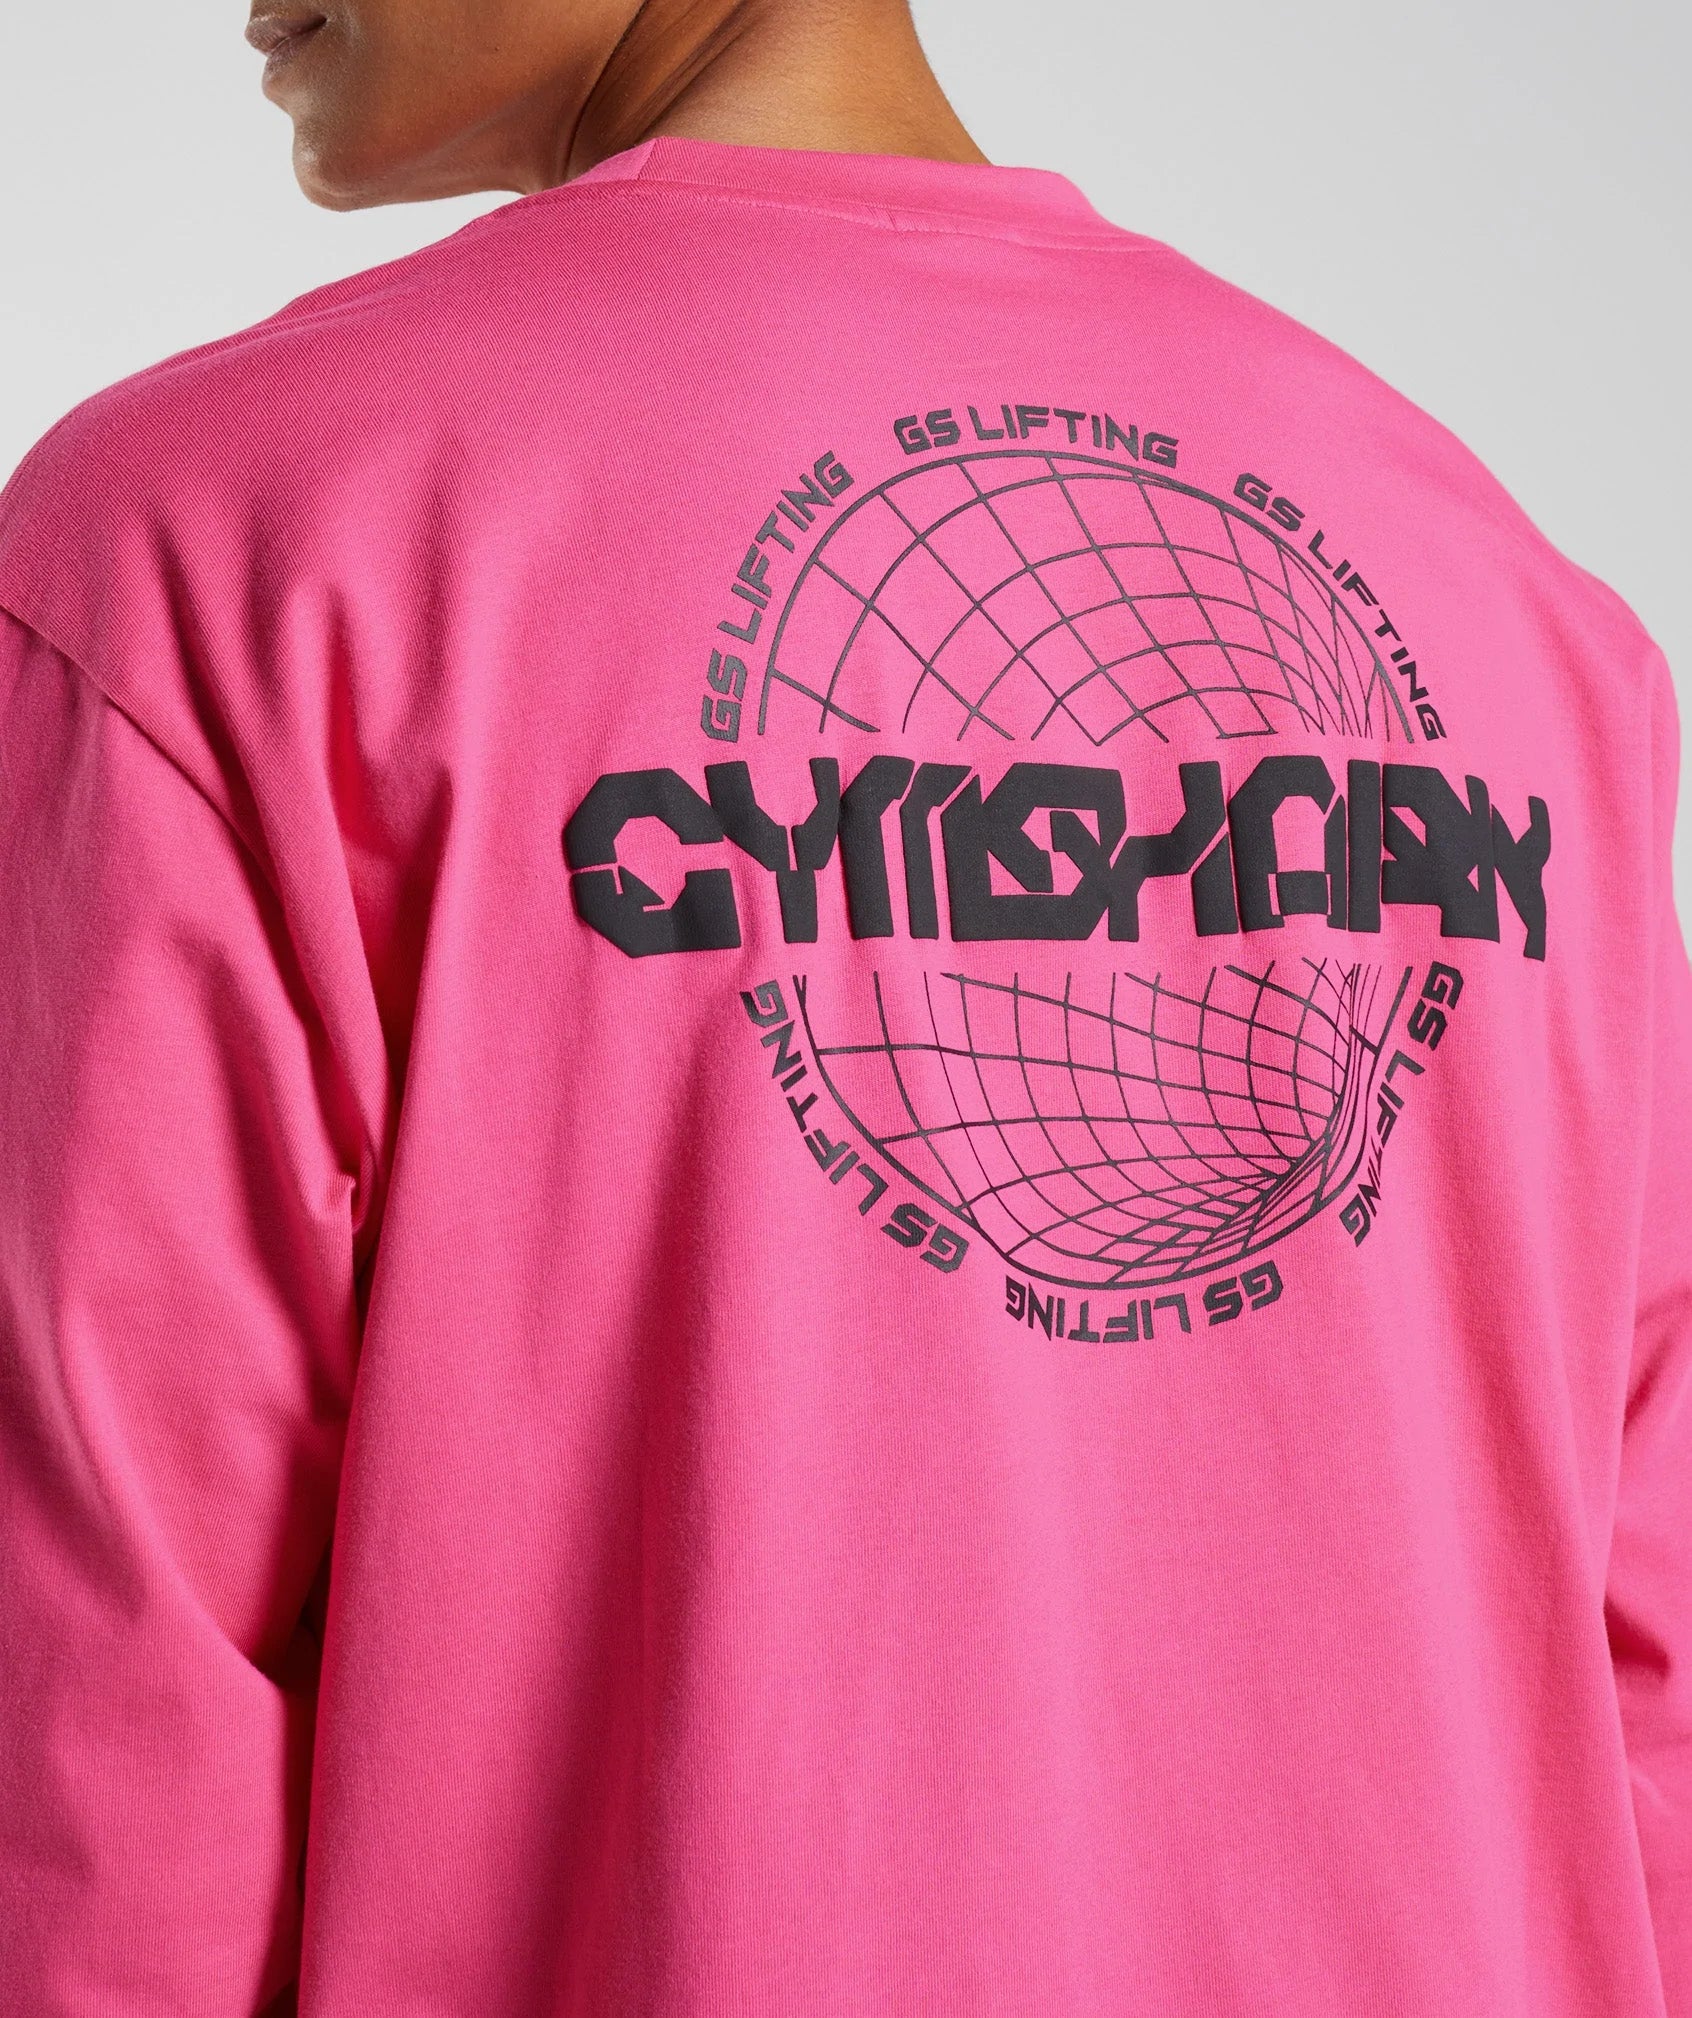 Vibes Long Sleeve T-Shirt in Bright Fuchsia - view 3